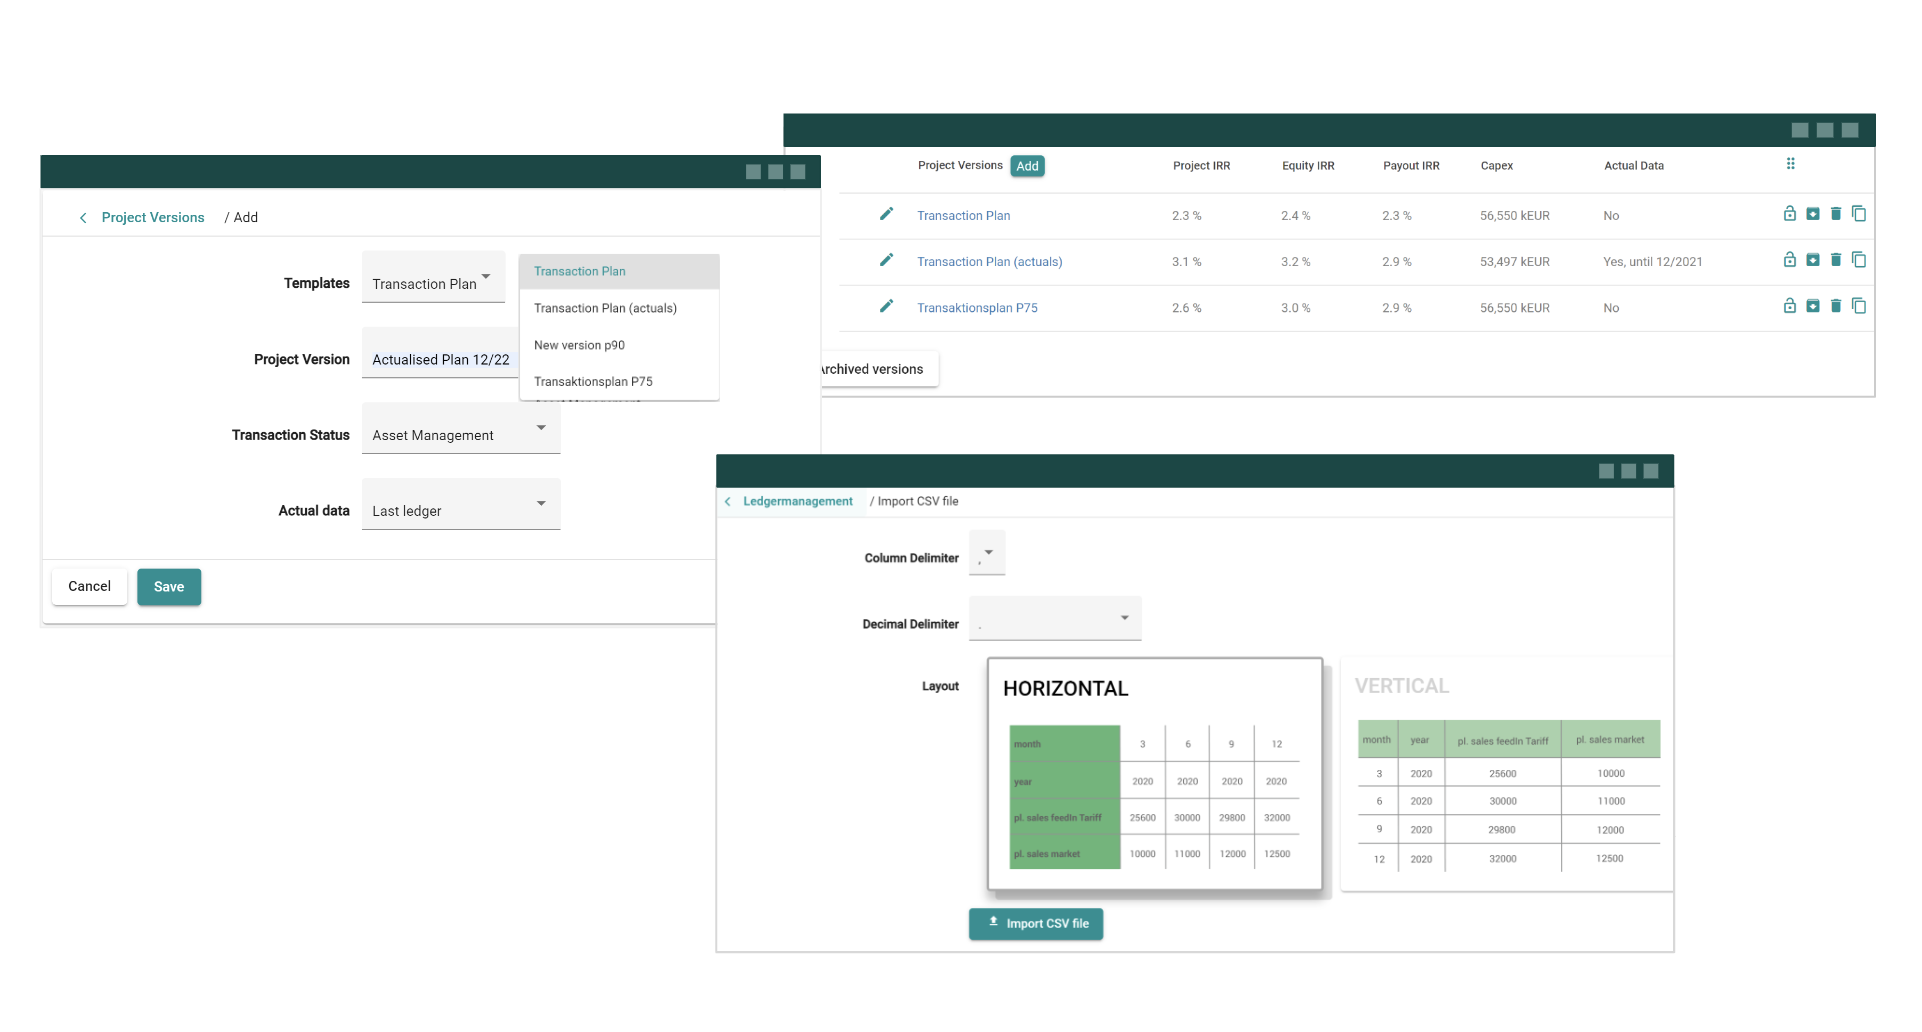 Returns & Project Versioning:  The seamless integration of actual data from GM AssetControlling into GM Valuation forms the backbone for a transparent reporting process of portfolio assets.